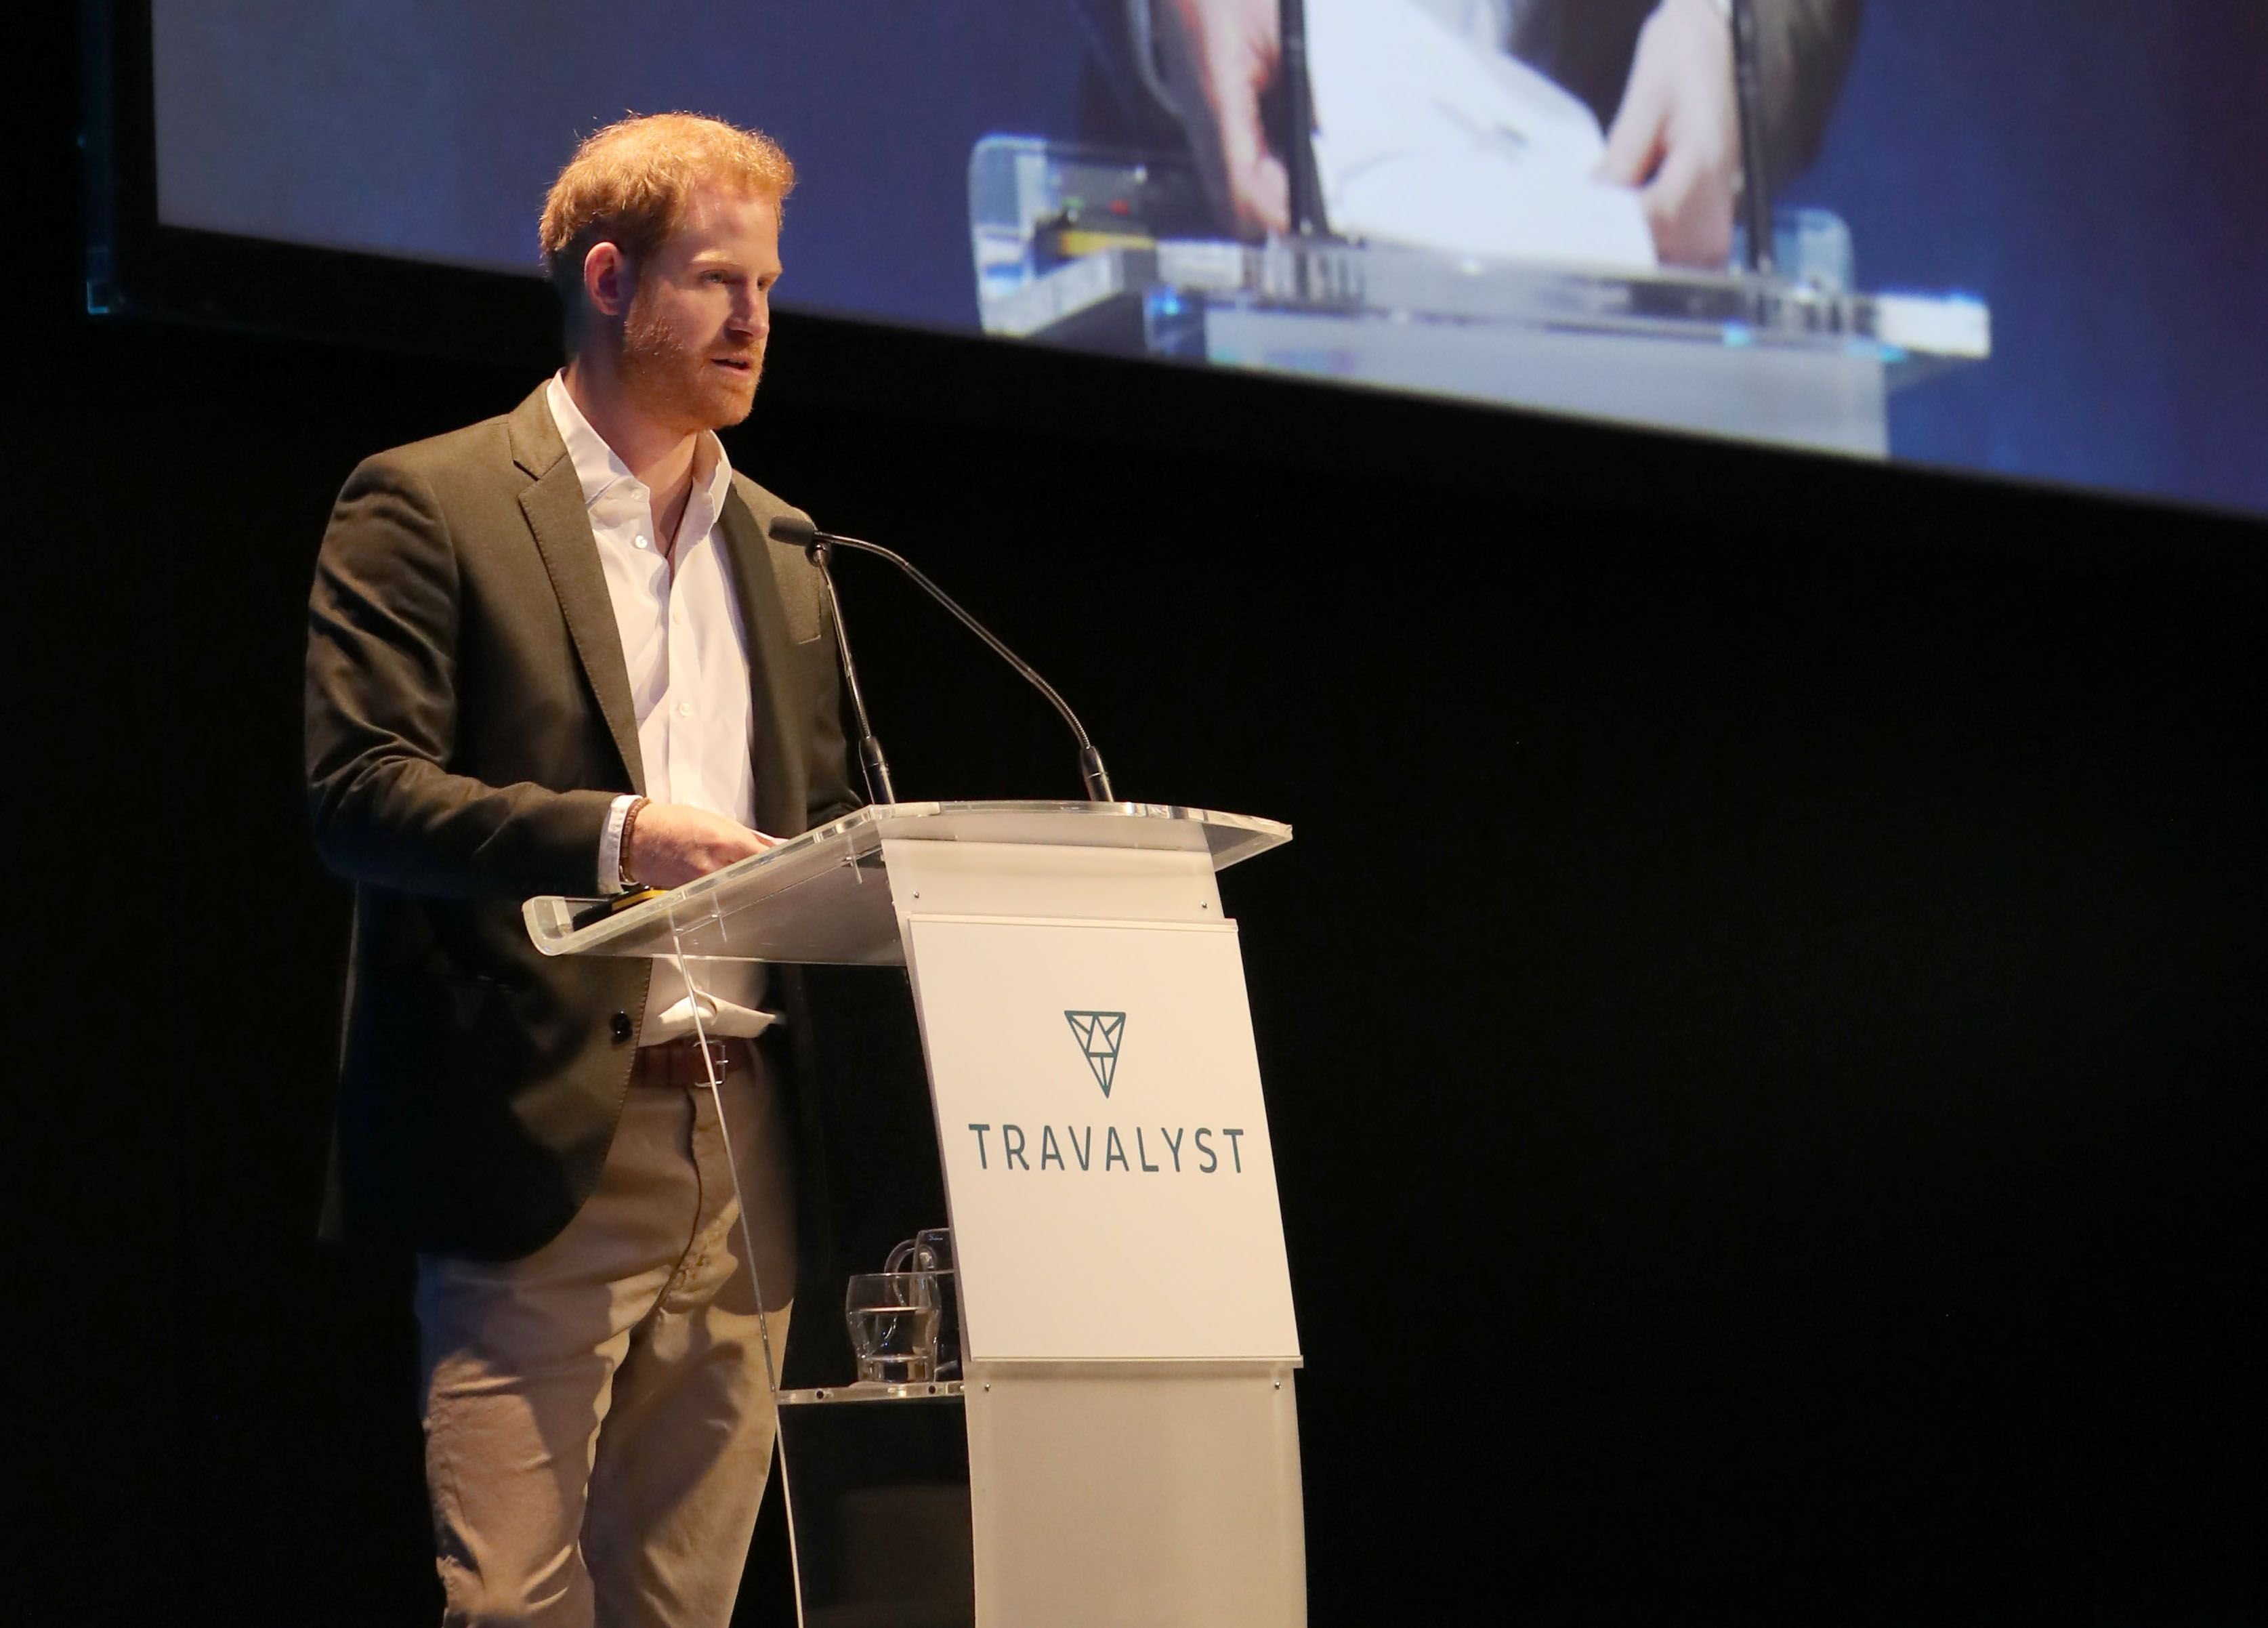 Prince Harry at a sustainable tourism summit at the Edinburgh International Conference Centre on February 26, 2020 | Getty Images